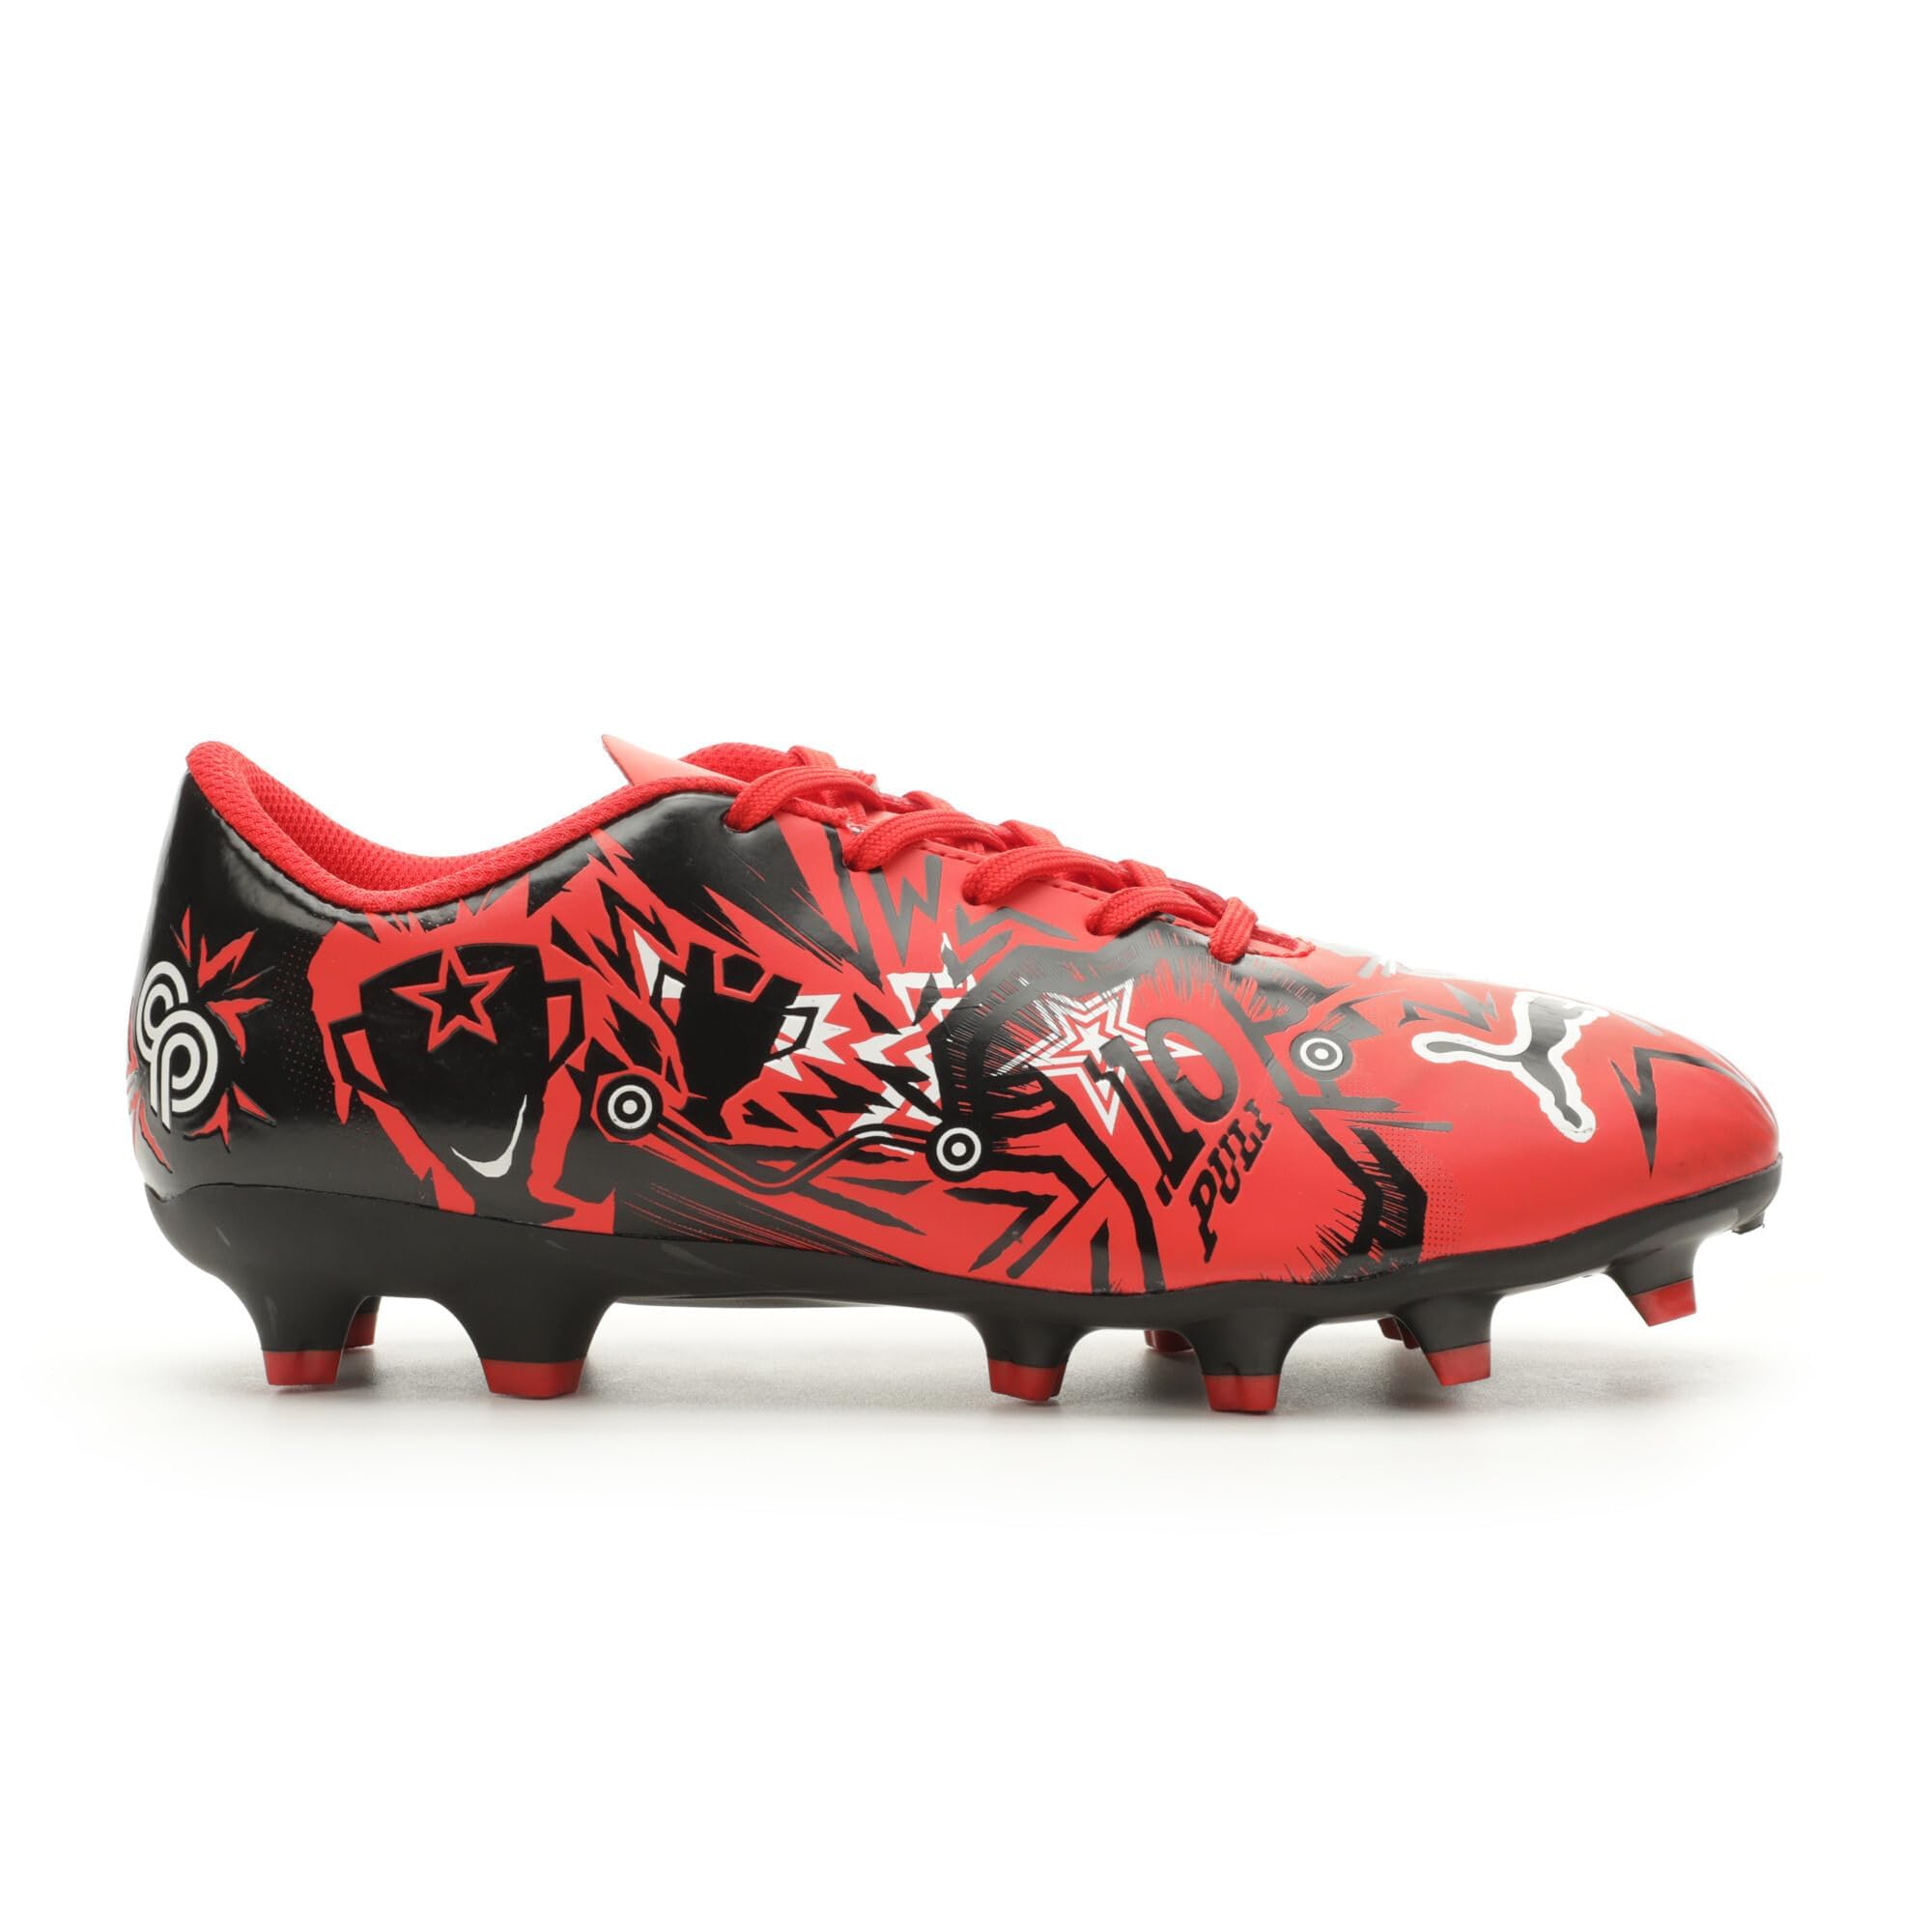 PUMA Ultra Play Christian Pulisic Firm Ground/Artificial Ground (Toddler/Little Kid/Big Kid)